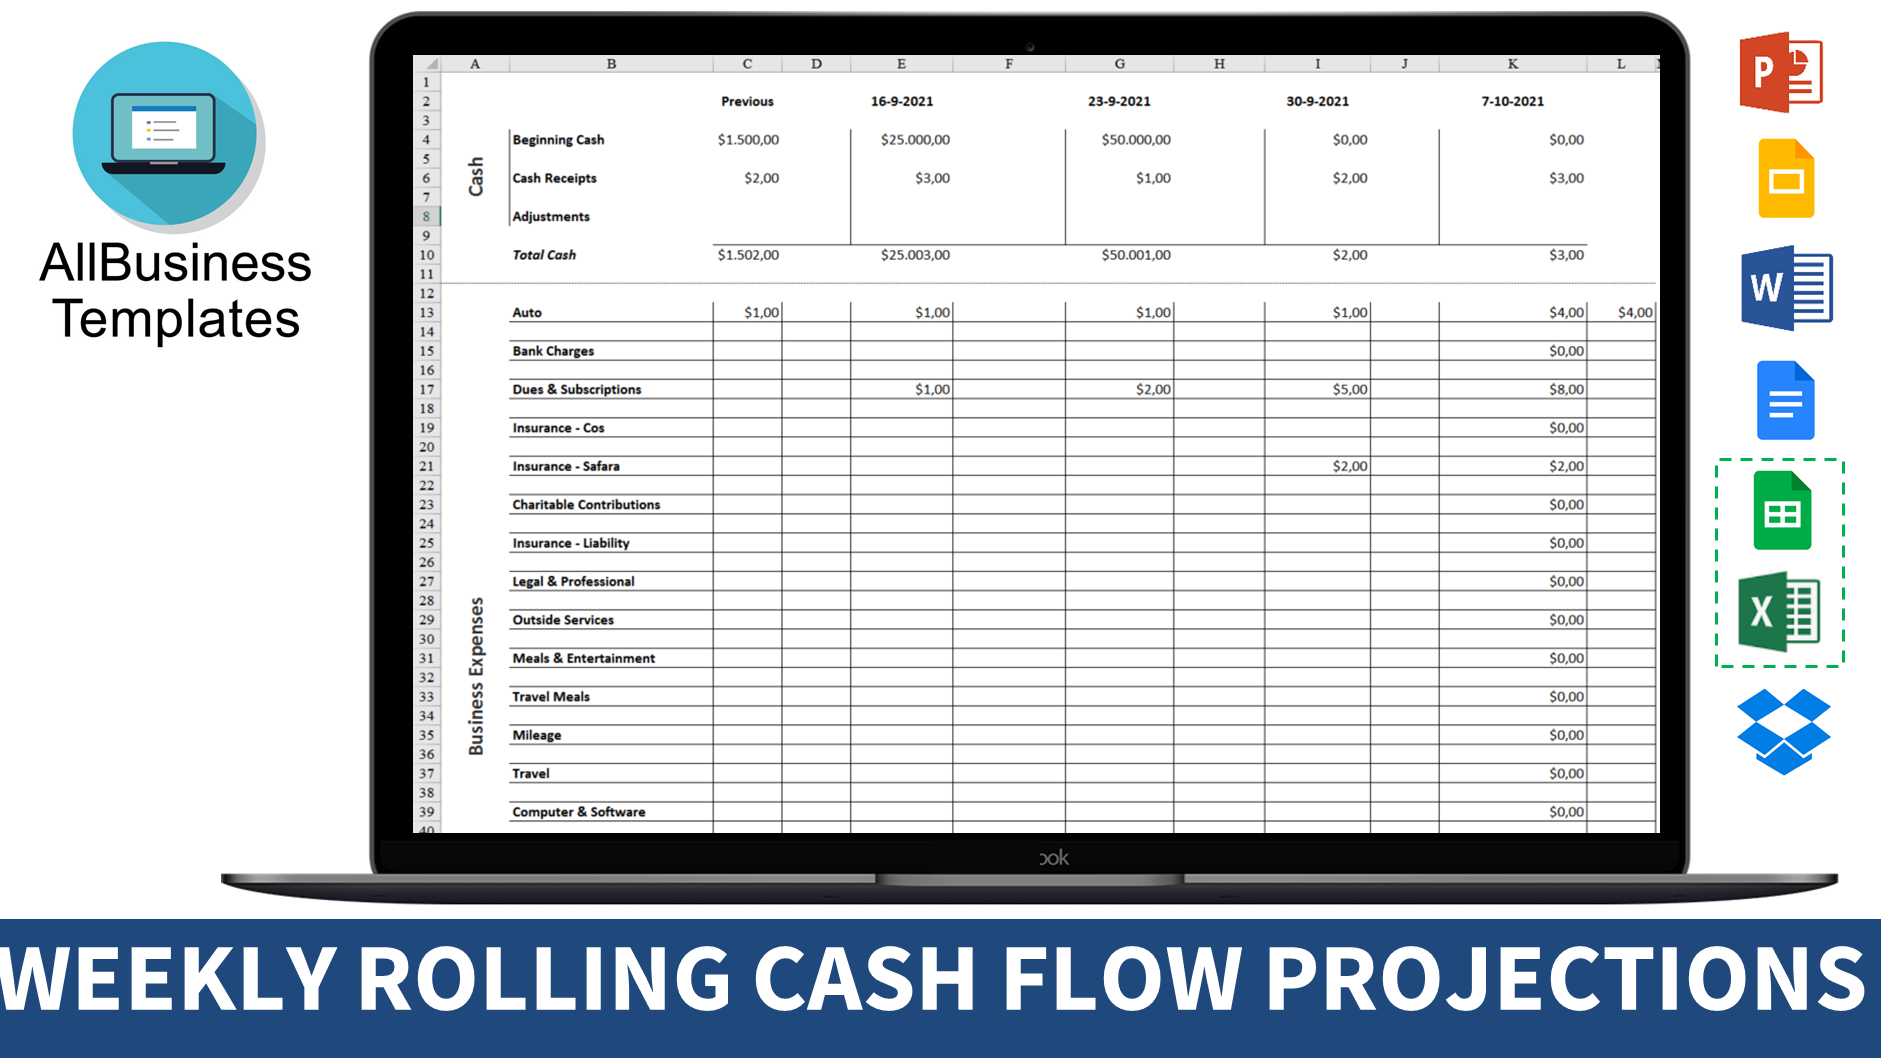 Weekly Rolling Cash Flow Projection main image